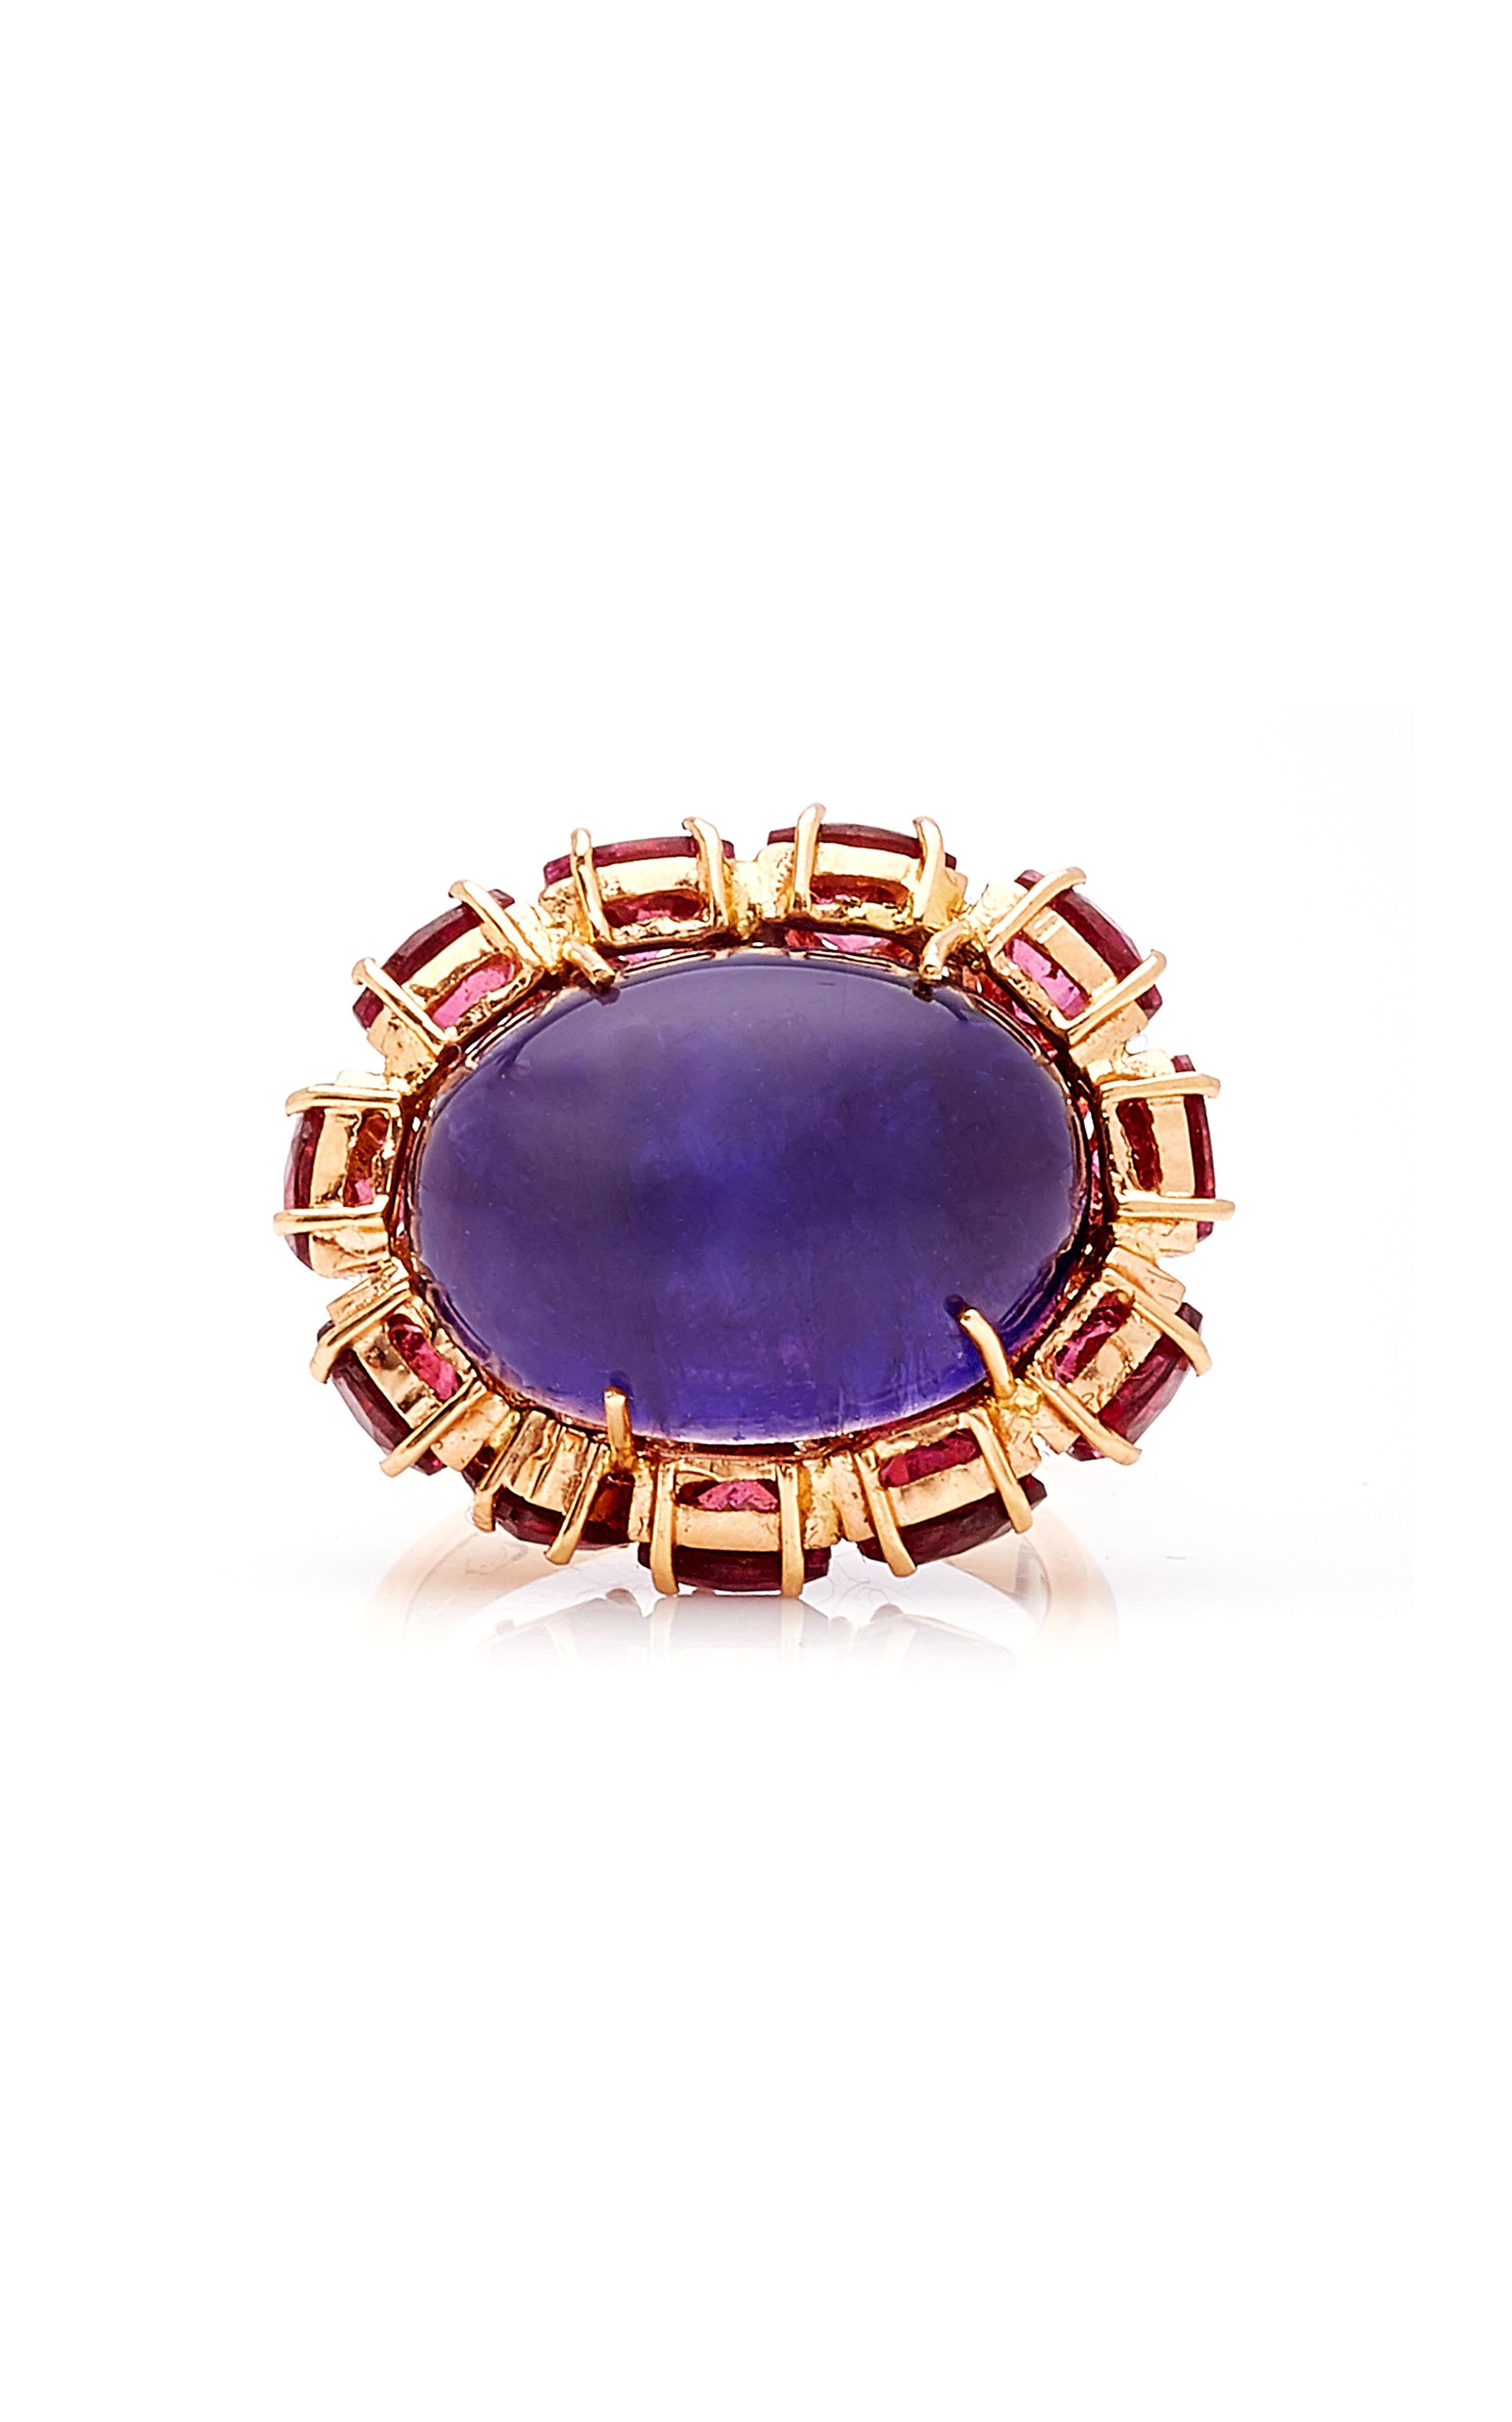 Hues of violet-blues & fuchsia .... This beguiling ring features a large indigo cabochon of Iolite emerging from a bed of glistening magenta trillion-cut Rhodolite.

18k Rose Gold, Iolite and Rhodolite
From Karma El Khalil's Rock Hall 2 Collection